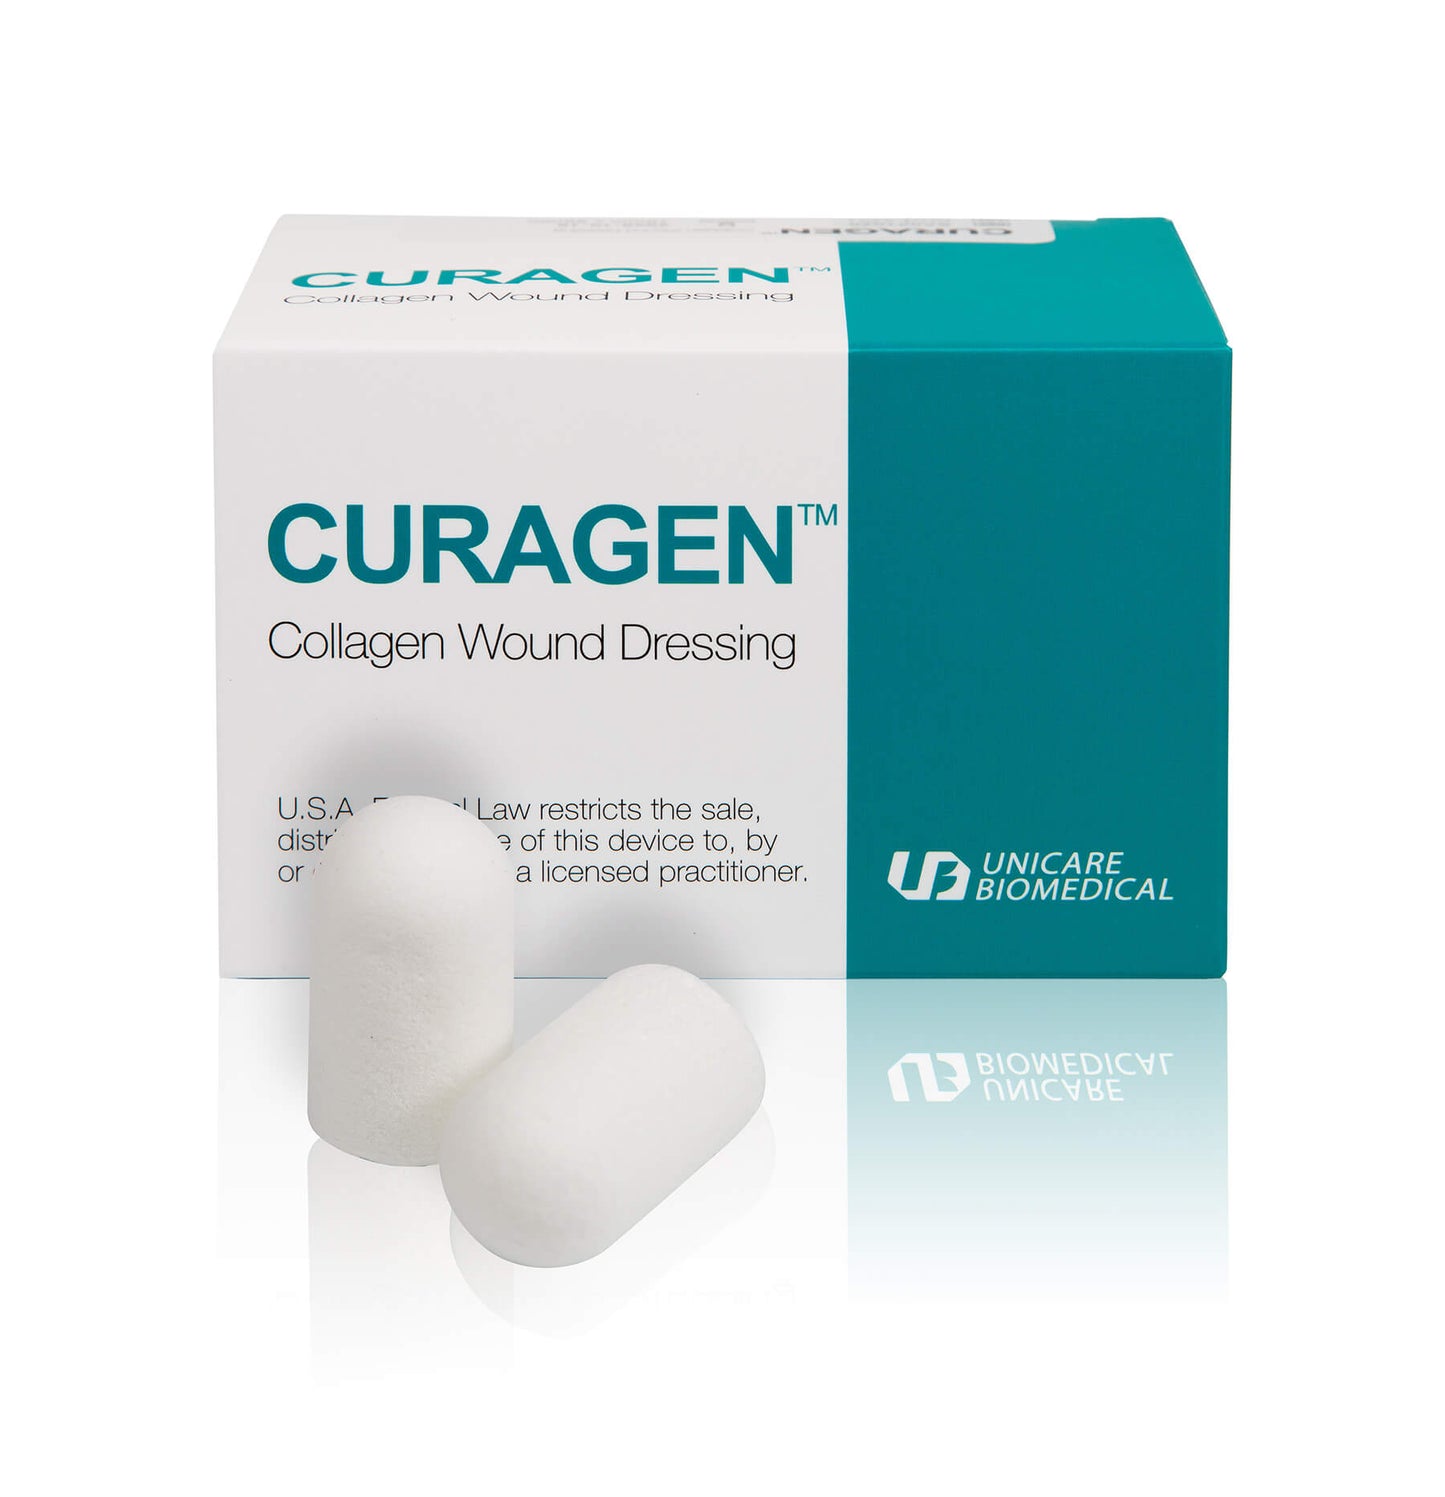 Collagen Wound Dressing Package with 2 plugs next to each other.